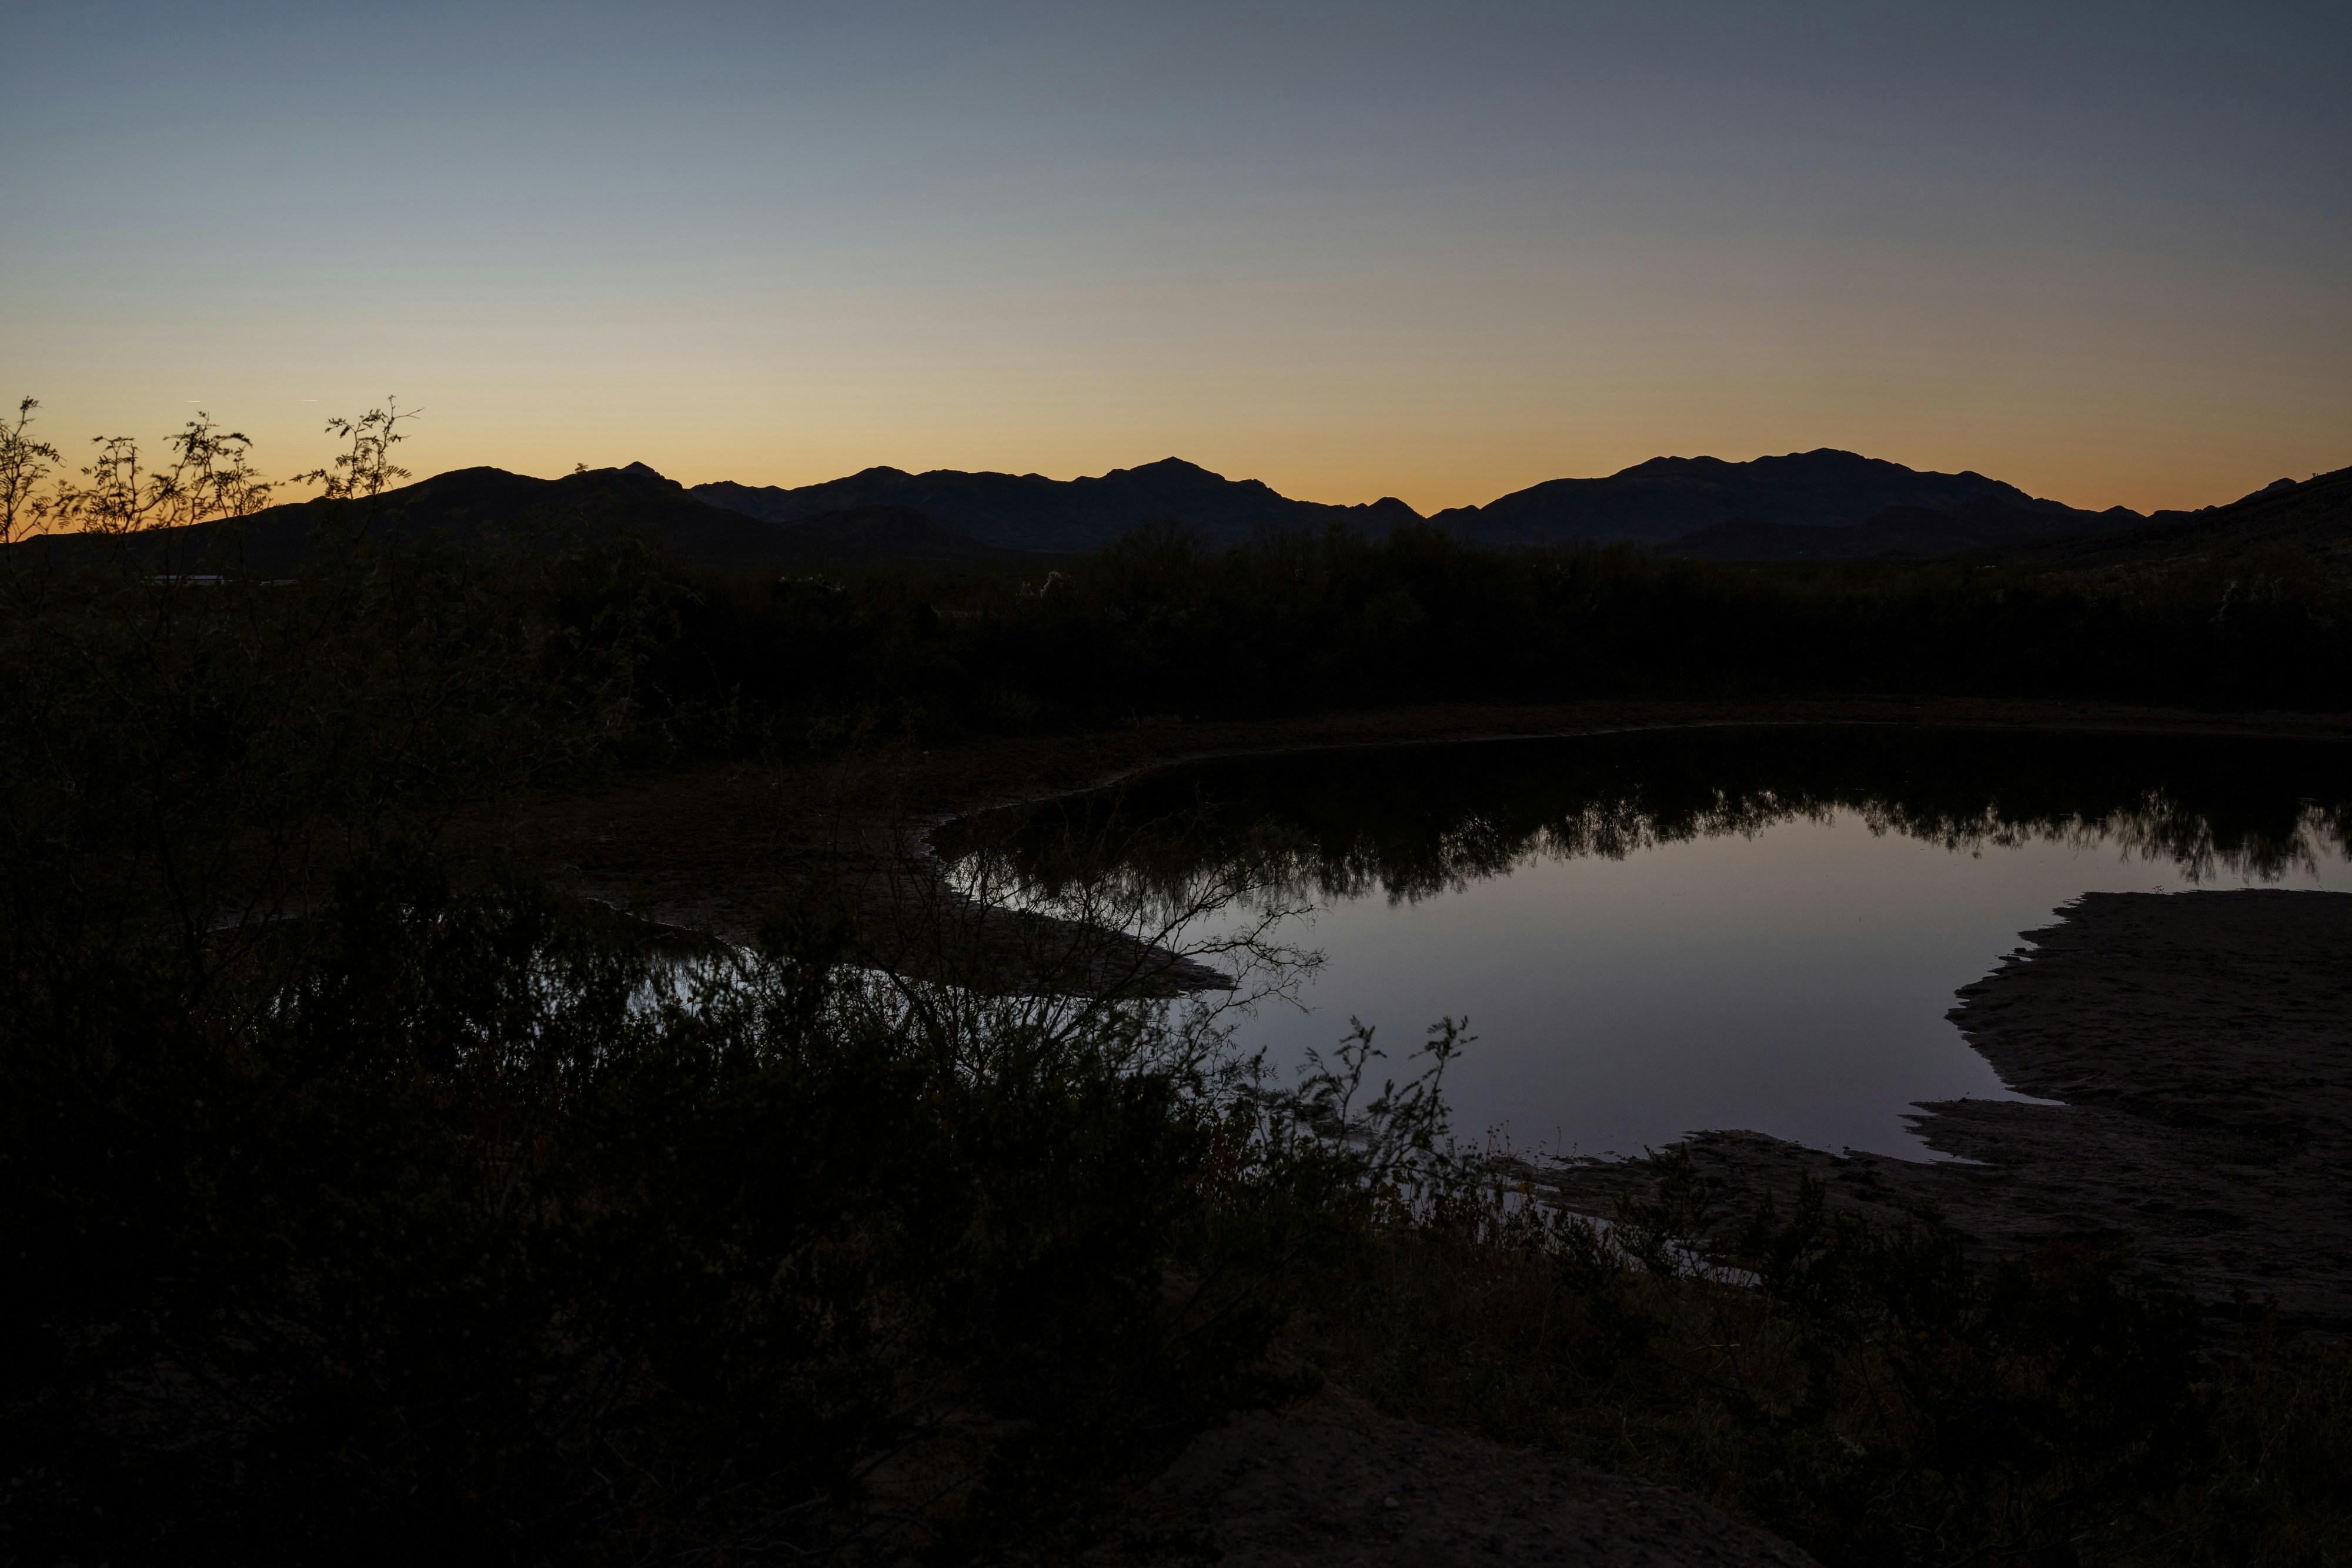 A view of the Five Mile Tank after sunset where a group of migrants were shot at by Michael and Mark Sheppard in late September, near Sierra Blanca, Texas on Sunday November 6, 2022. Photo: Paul Ratje for The Intercept